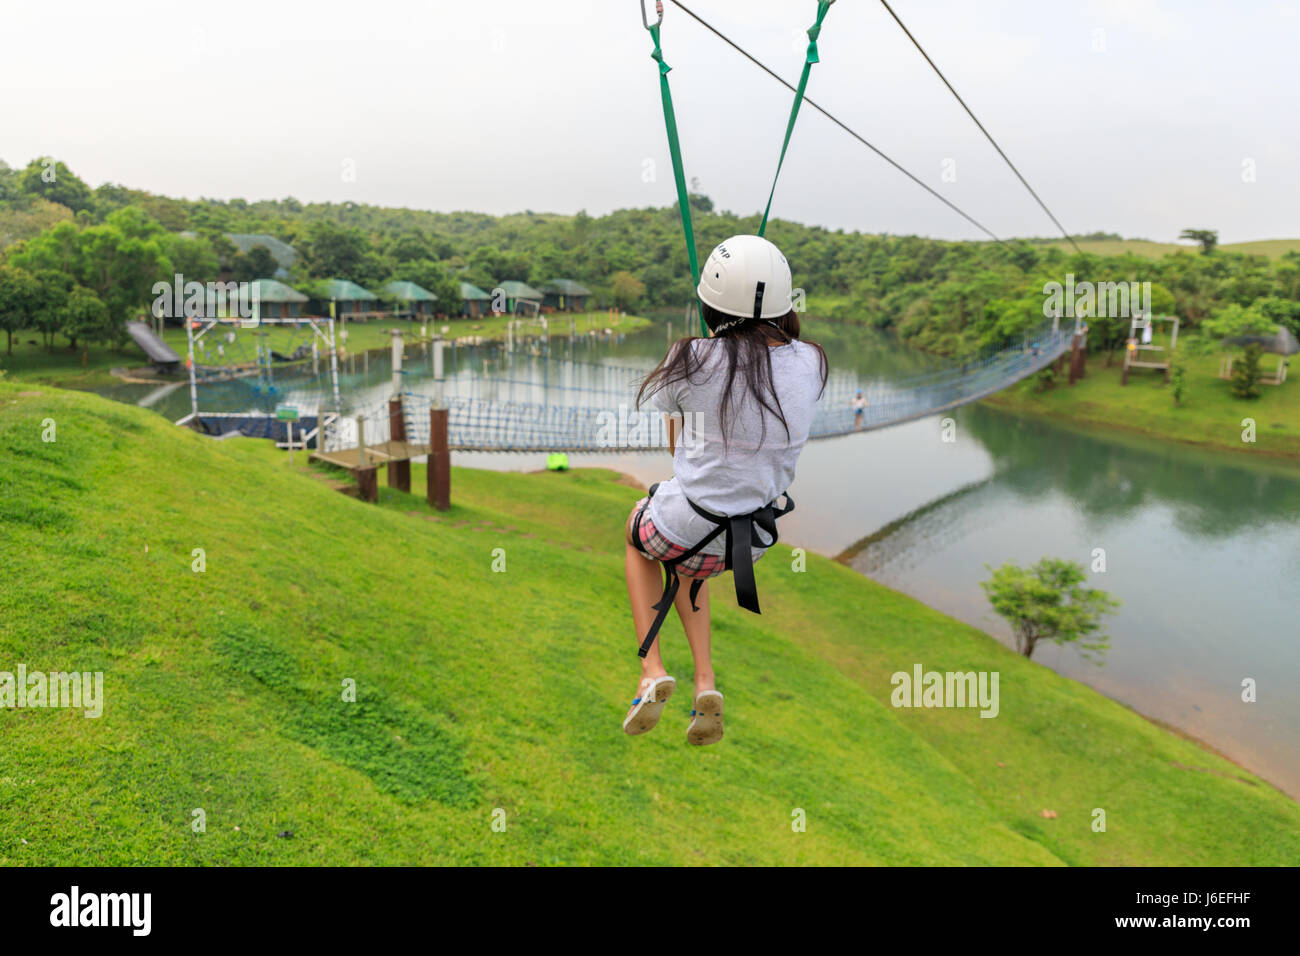 Apr 23, 2017 Woman sliding on a zip line adventure at Mountain lake resort in Laguna, Philippines Stock Photo